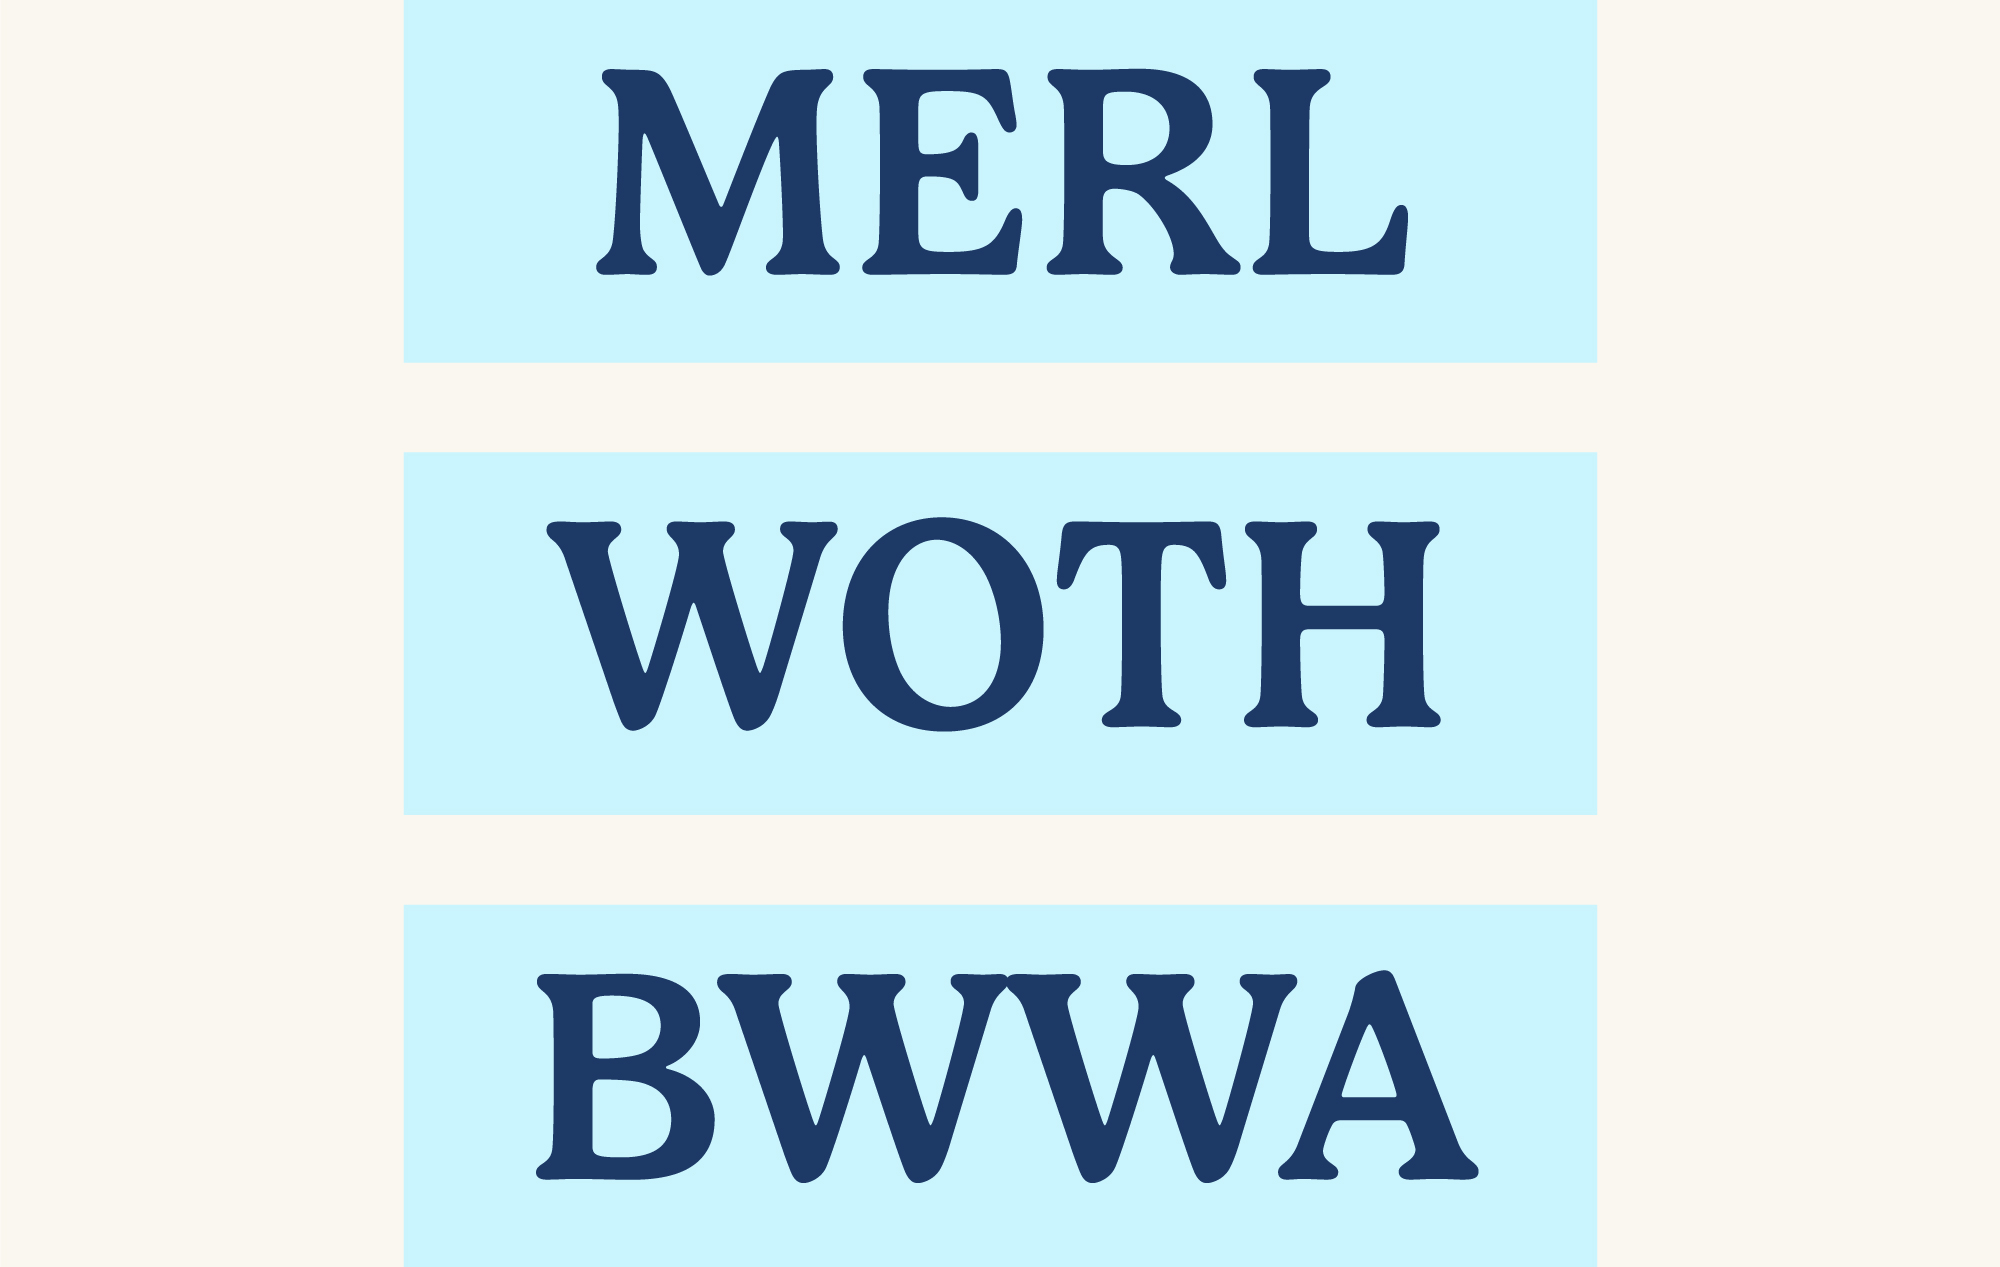 An example of bird codes, MERL, WOTH, BWWA